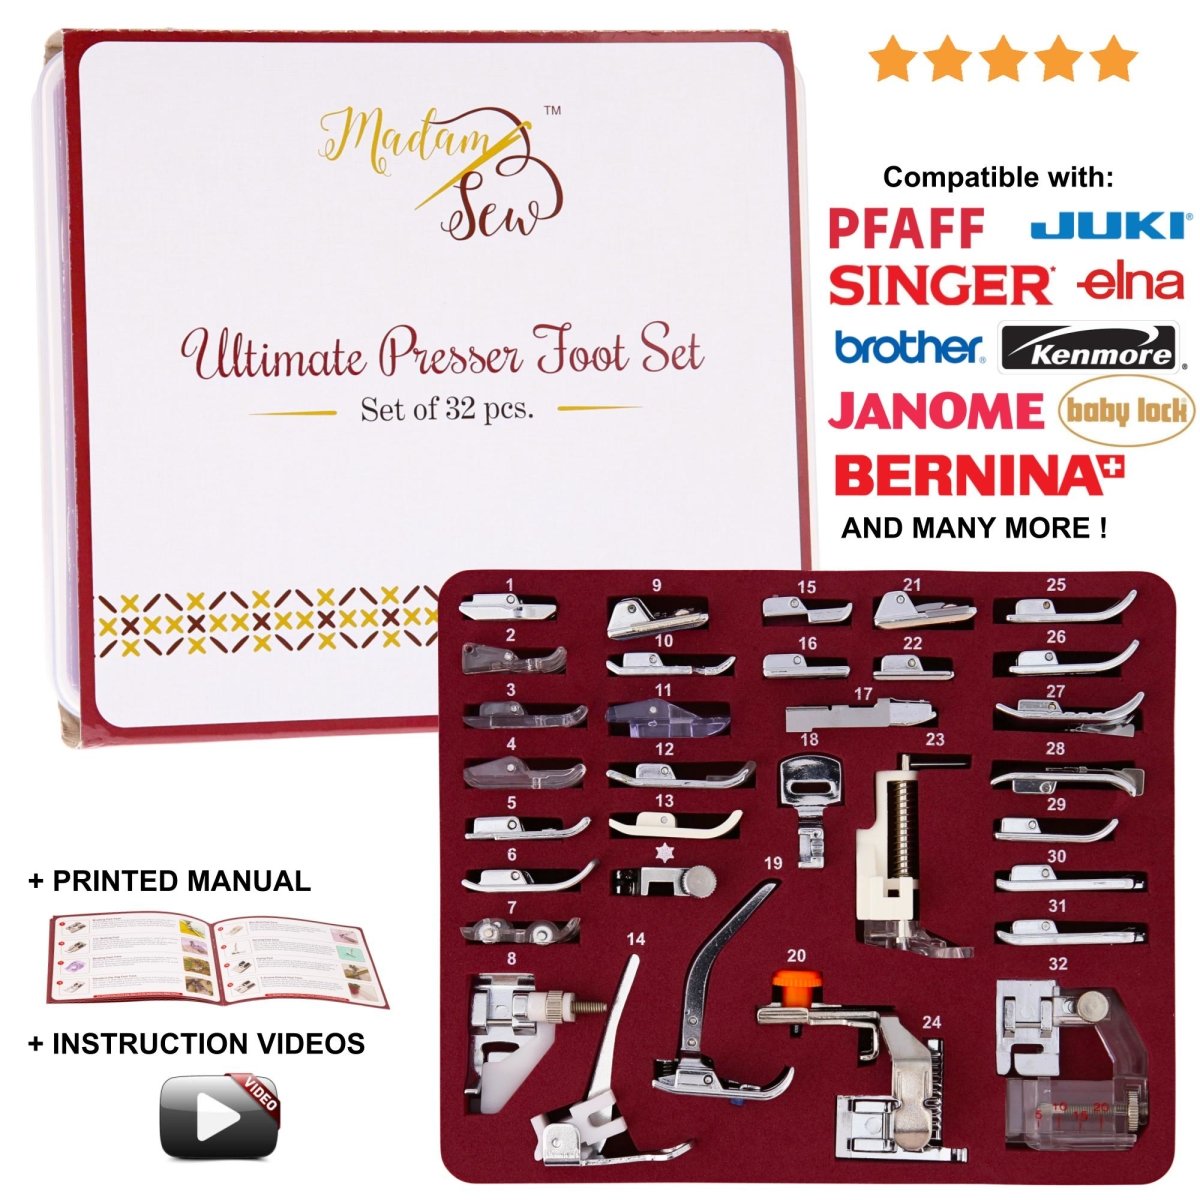 Madam Sew's Ultimate Presser Foot Set with the manual booklet